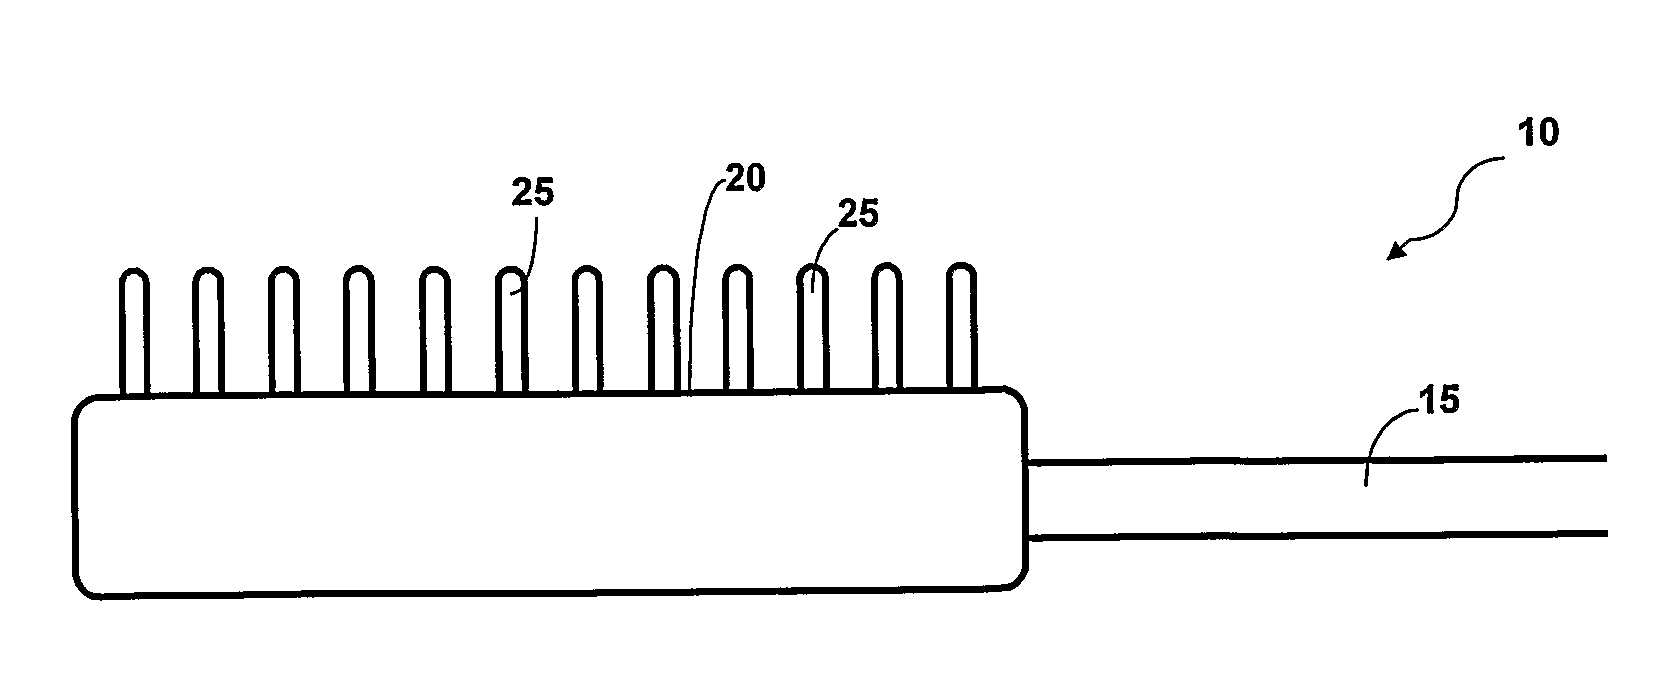 Device and Method for Treating Tissue